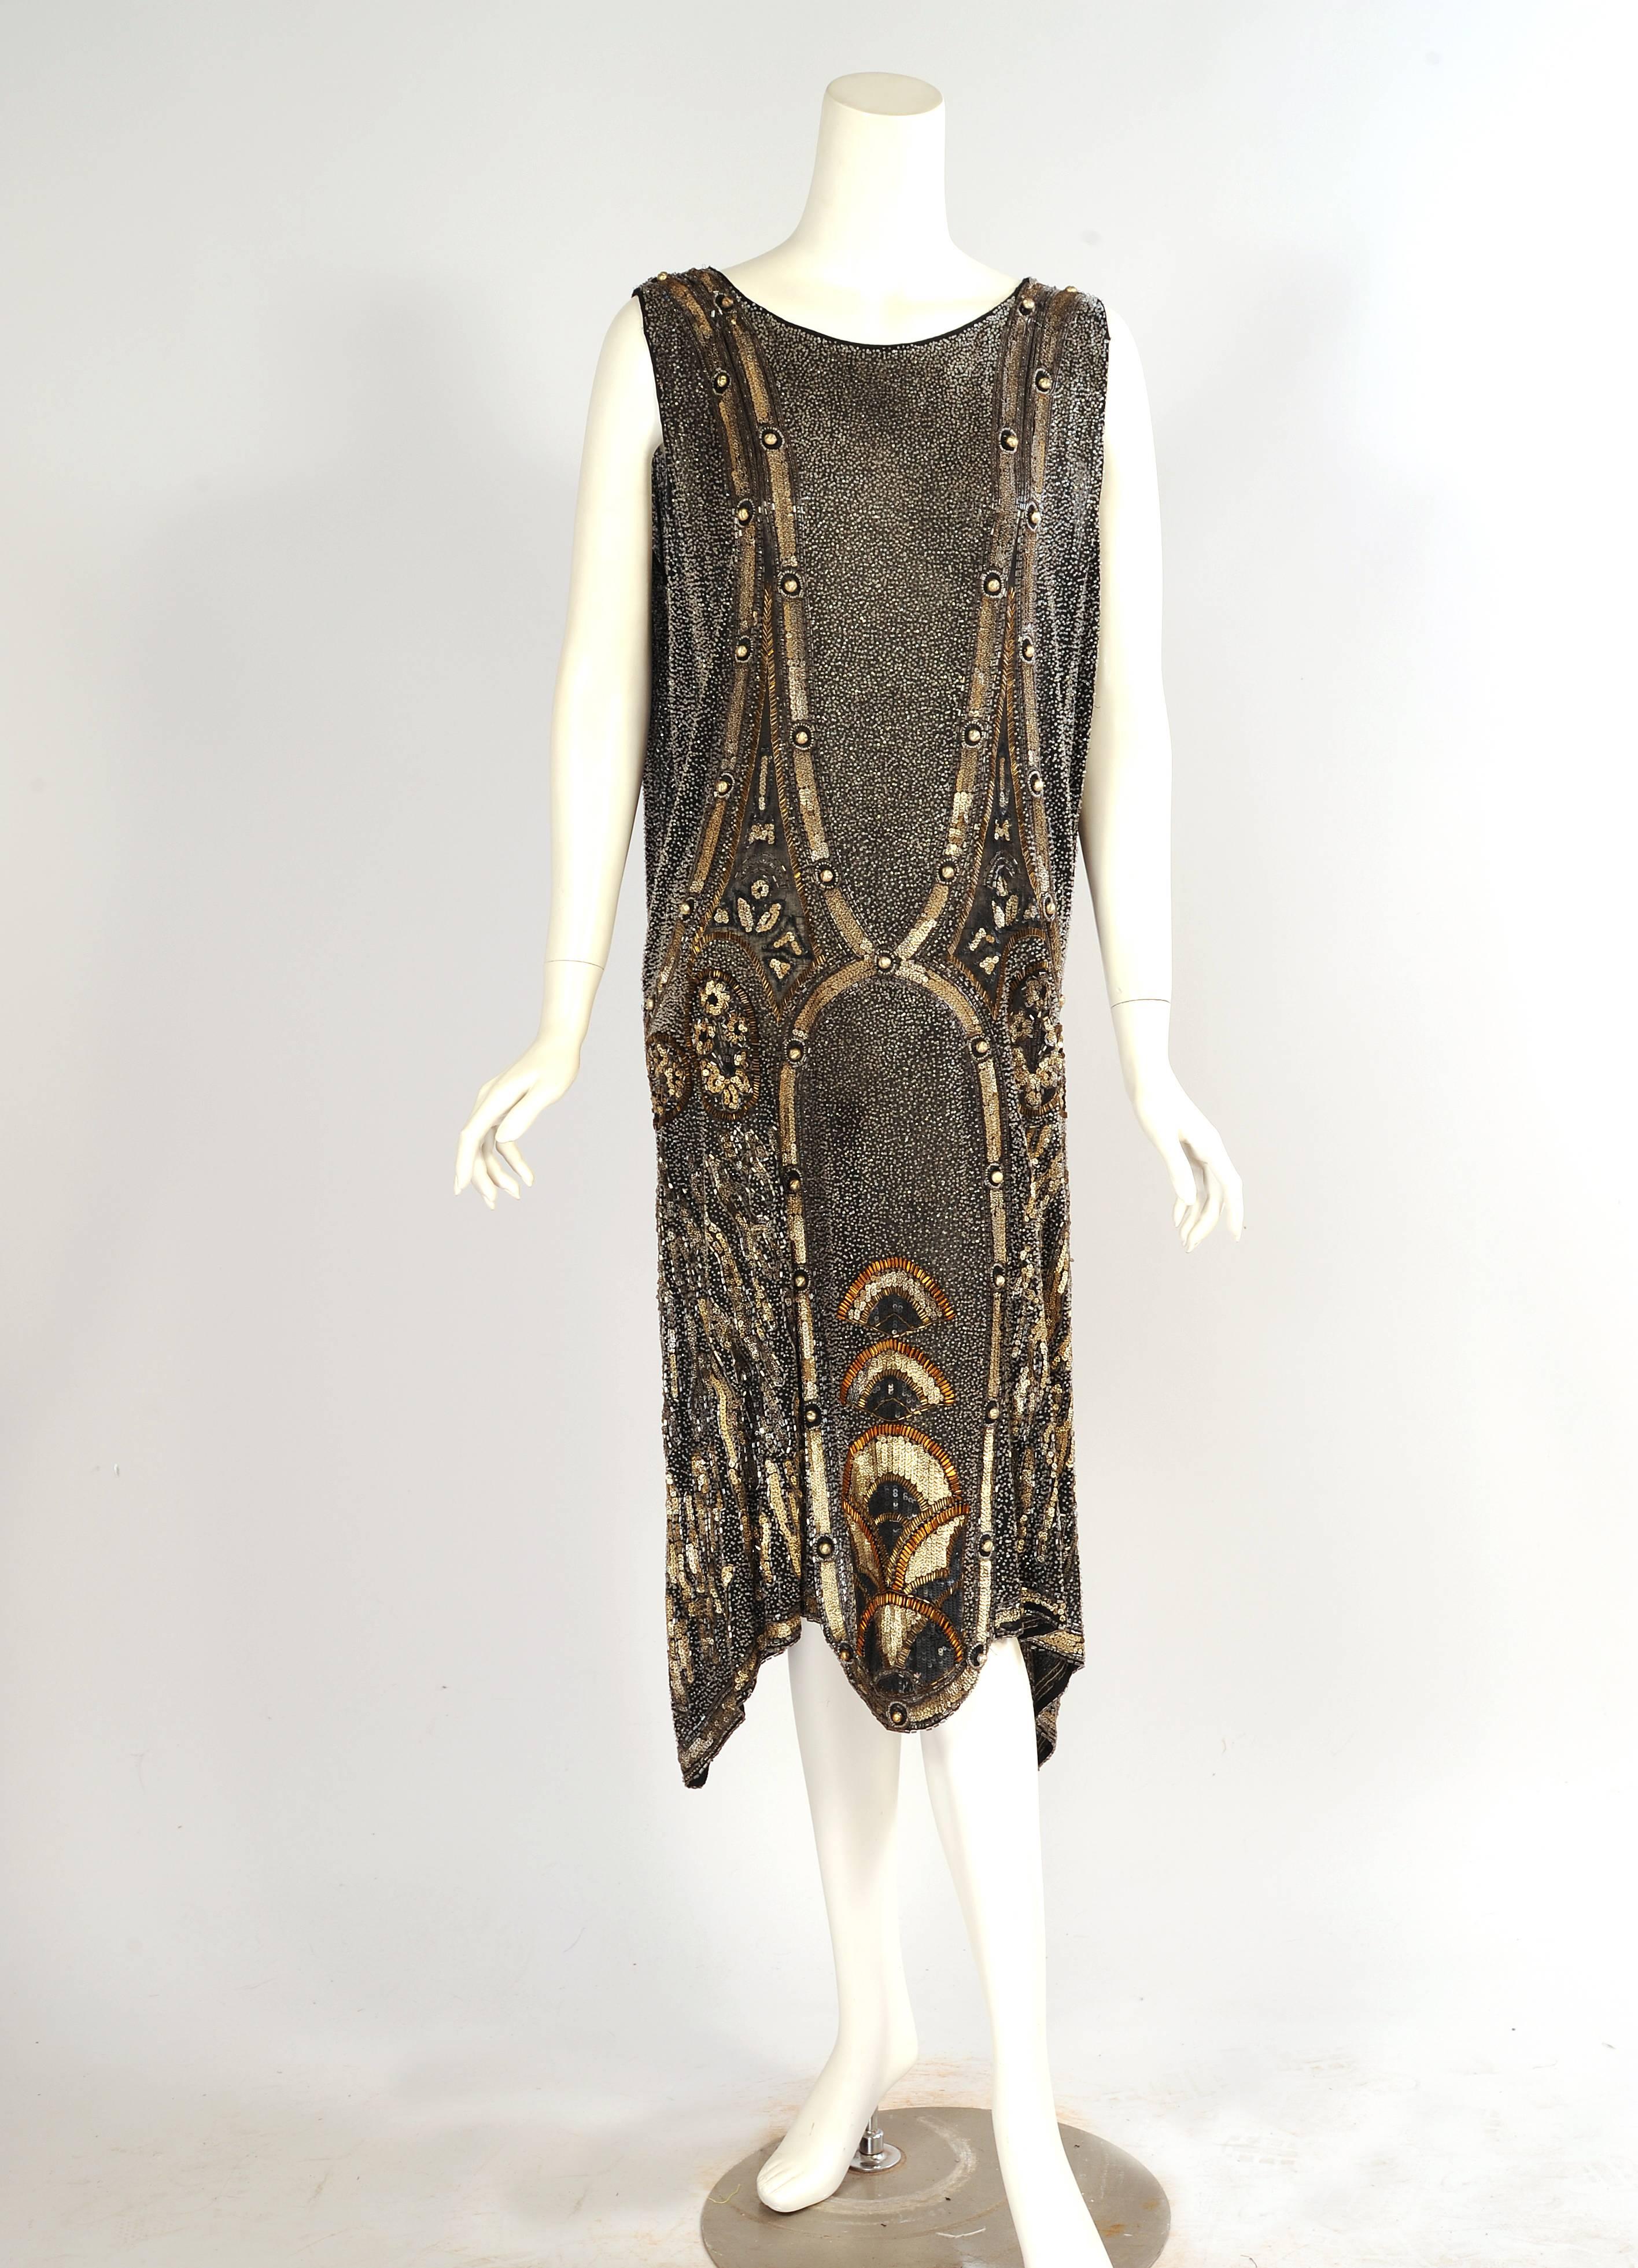 This stunning Art Deco flapper dress is is completely beaded. The body of the black cotton dress is covered with tiny clear beads. Silver bugle beads outline the graphic design which is made with textured matte gold sequins and gold blister pearls. 